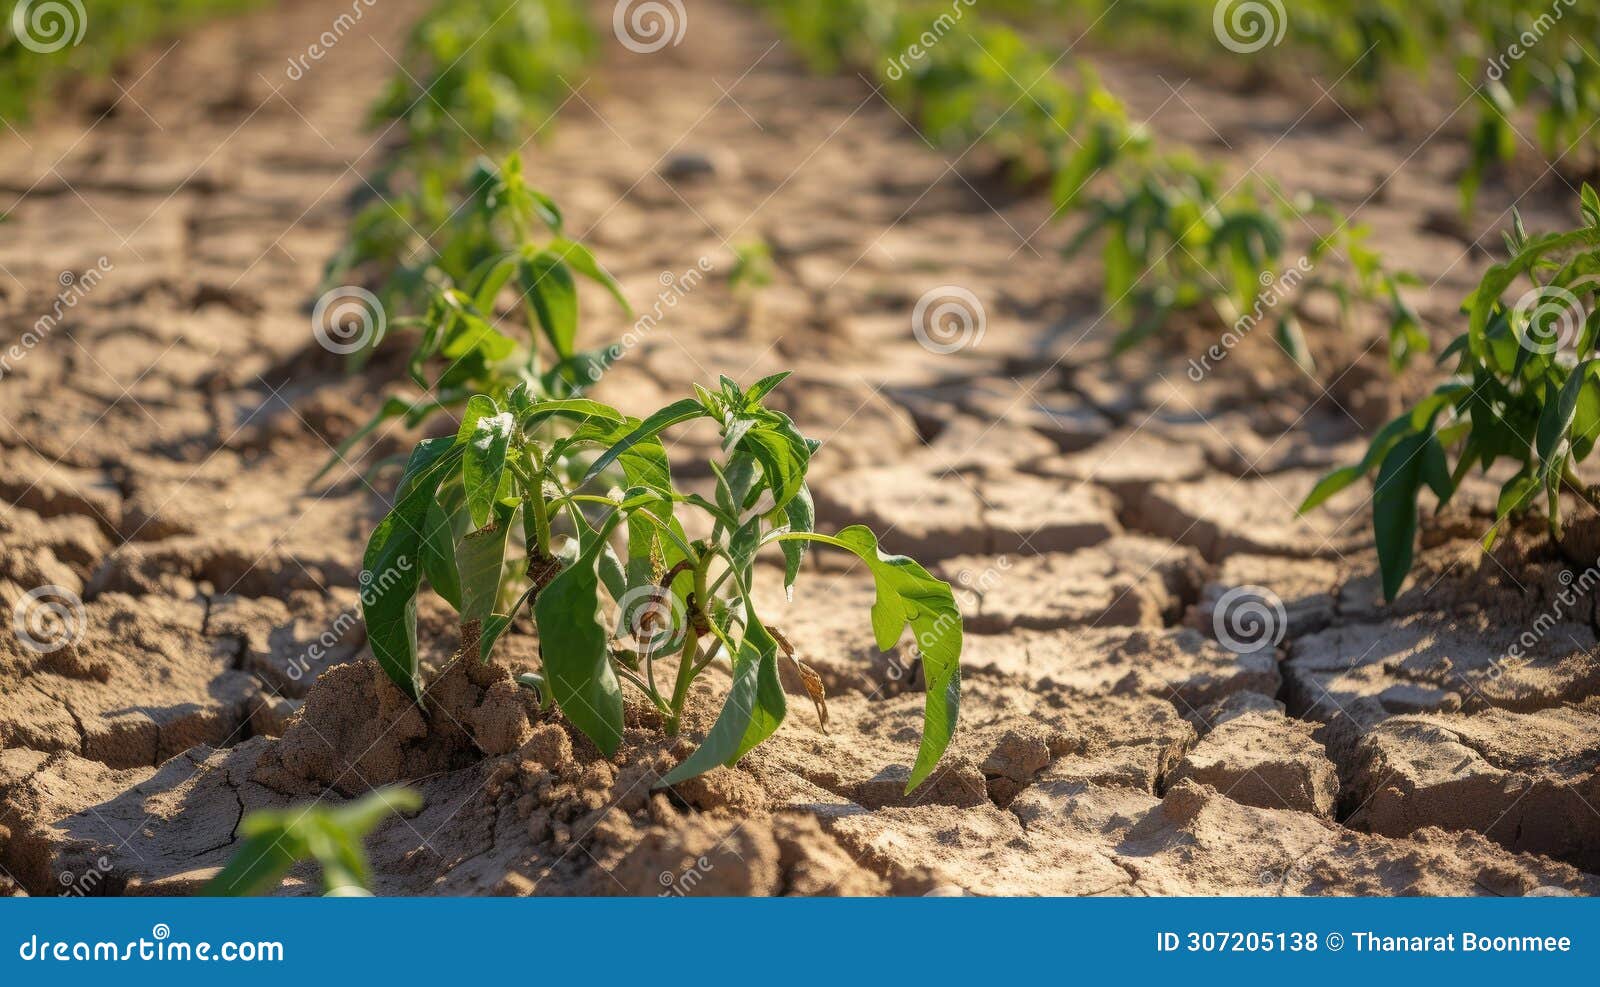 cultivated plants succumb to the relentless grip of dryness, a stark landscape emerges, ai generated